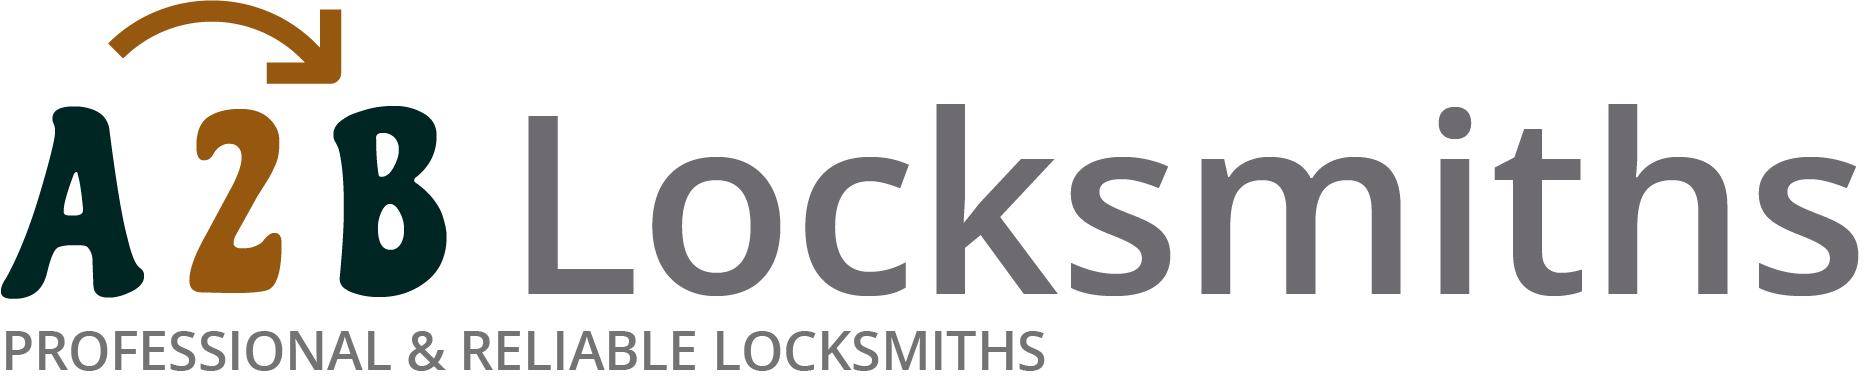 If you are locked out of house in Chislehurst, our 24/7 local emergency locksmith services can help you.